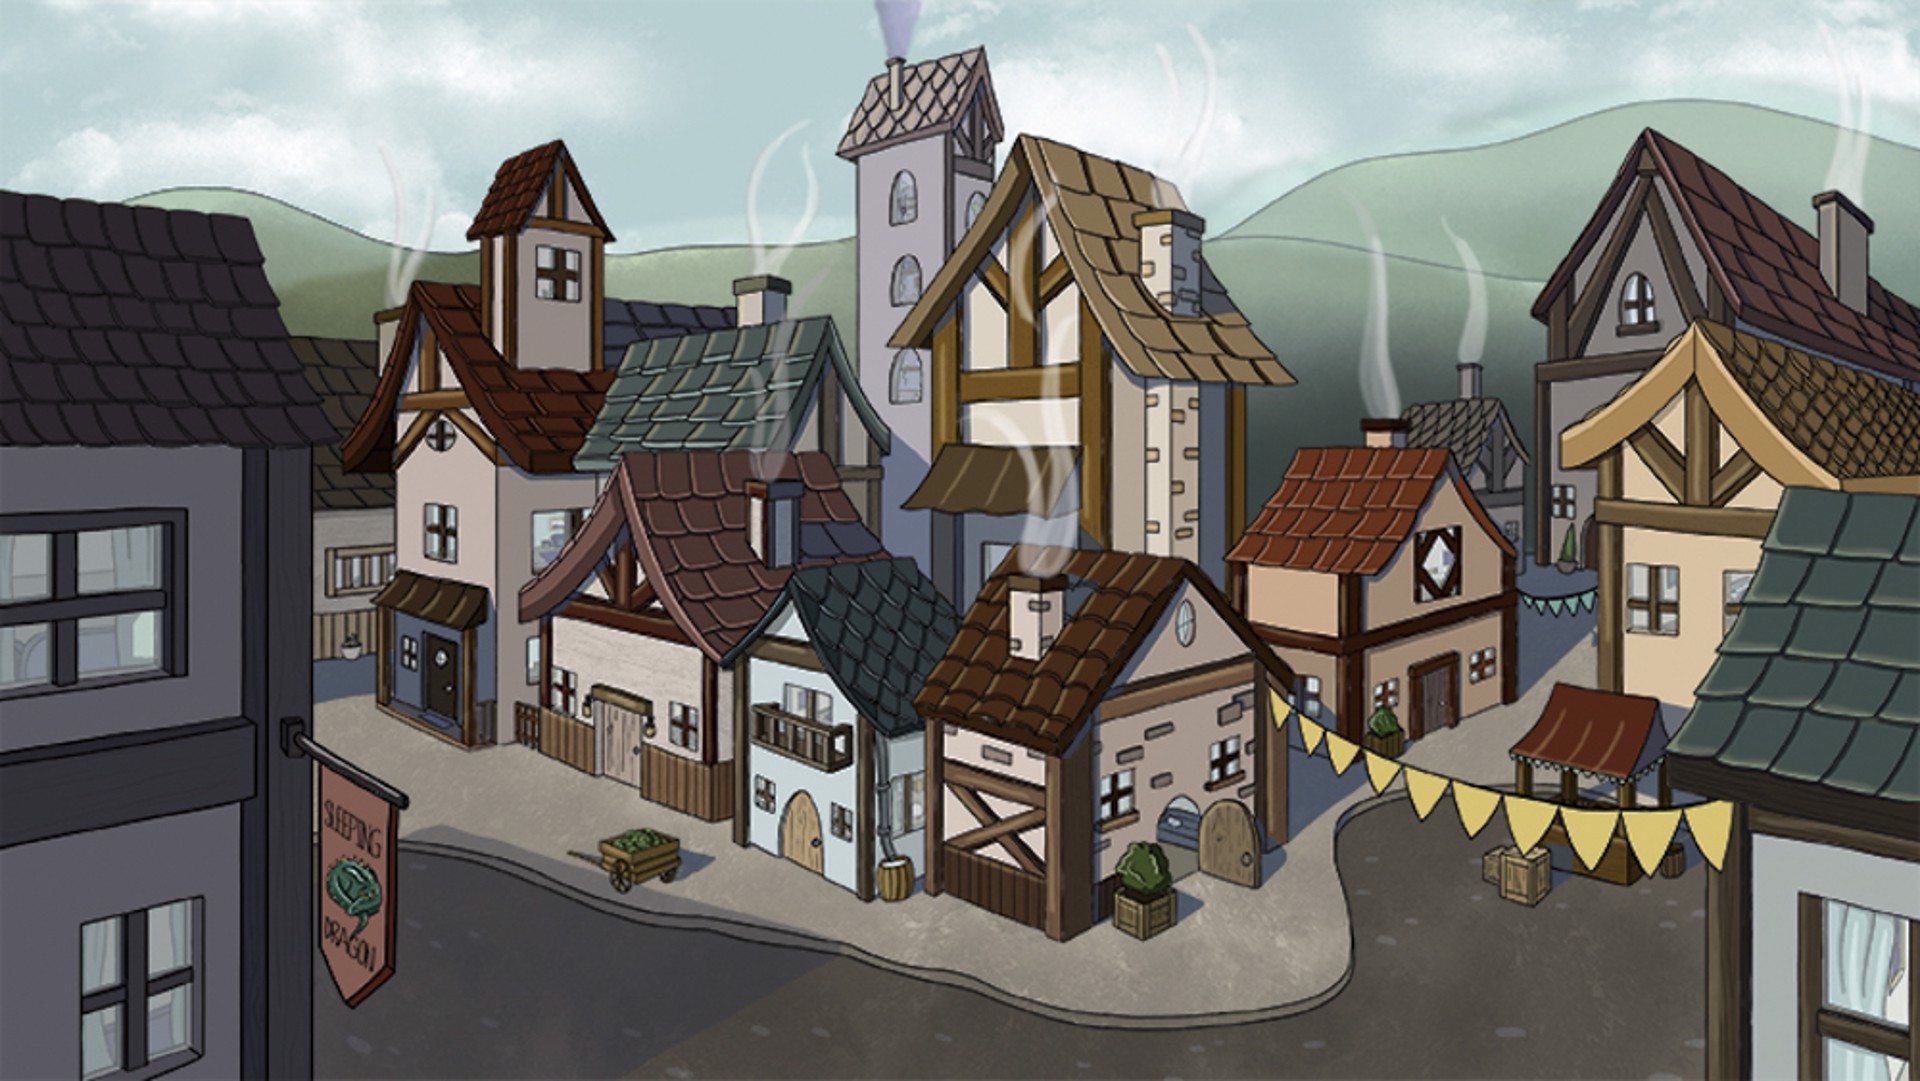 Town in the Foothills by Christina Wright